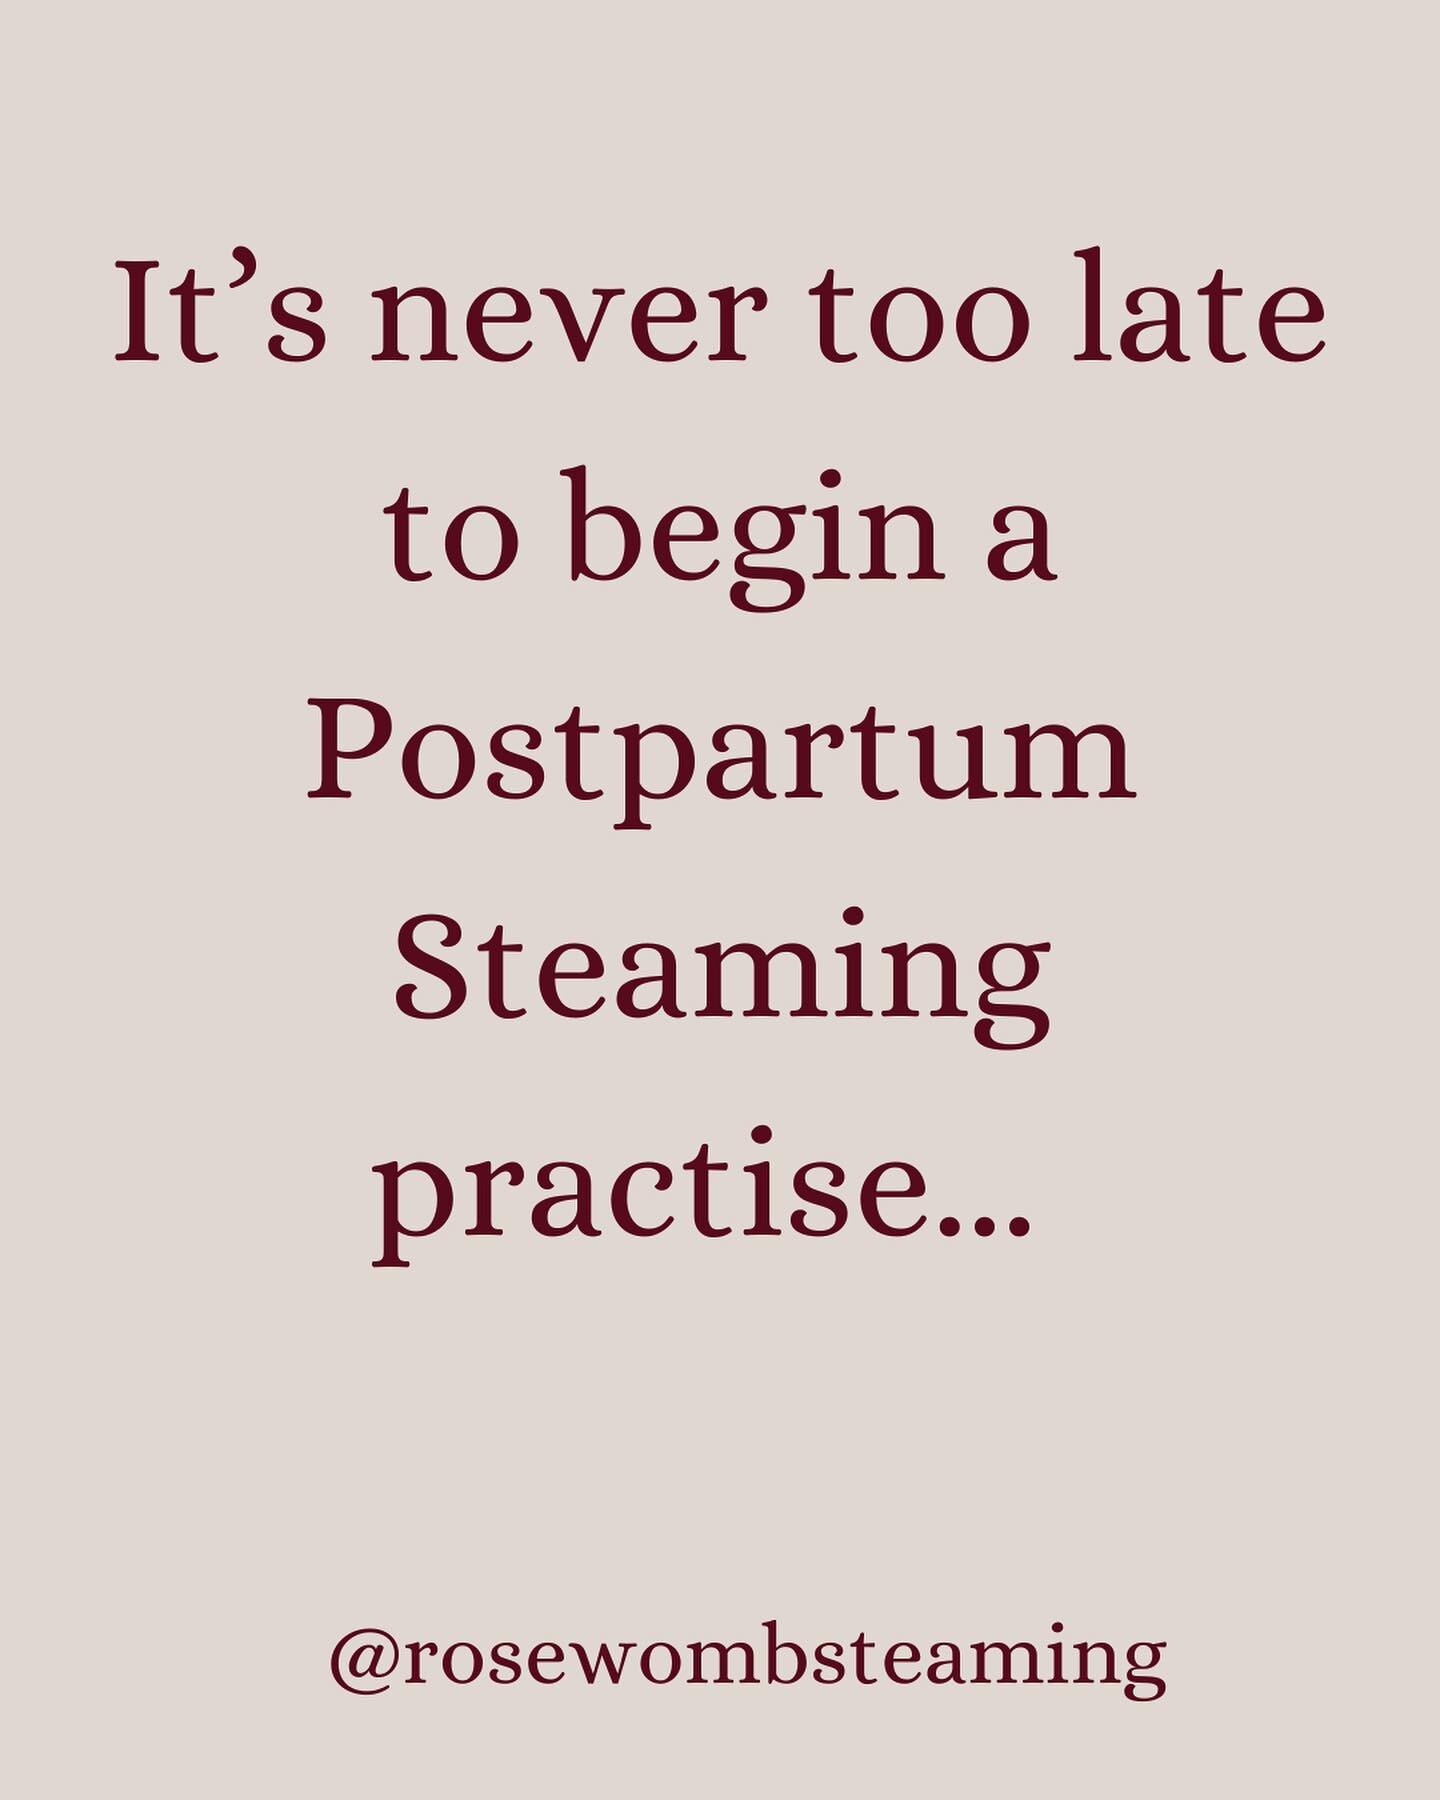 It&rsquo;s never too late in Postpartum to begin a steaming practise.

Postpartum is forever as they say ❤️

If you didn&rsquo;t steam in early postpartum, there are still many ways you can receive the benefits - even years later.

Softening scar tis